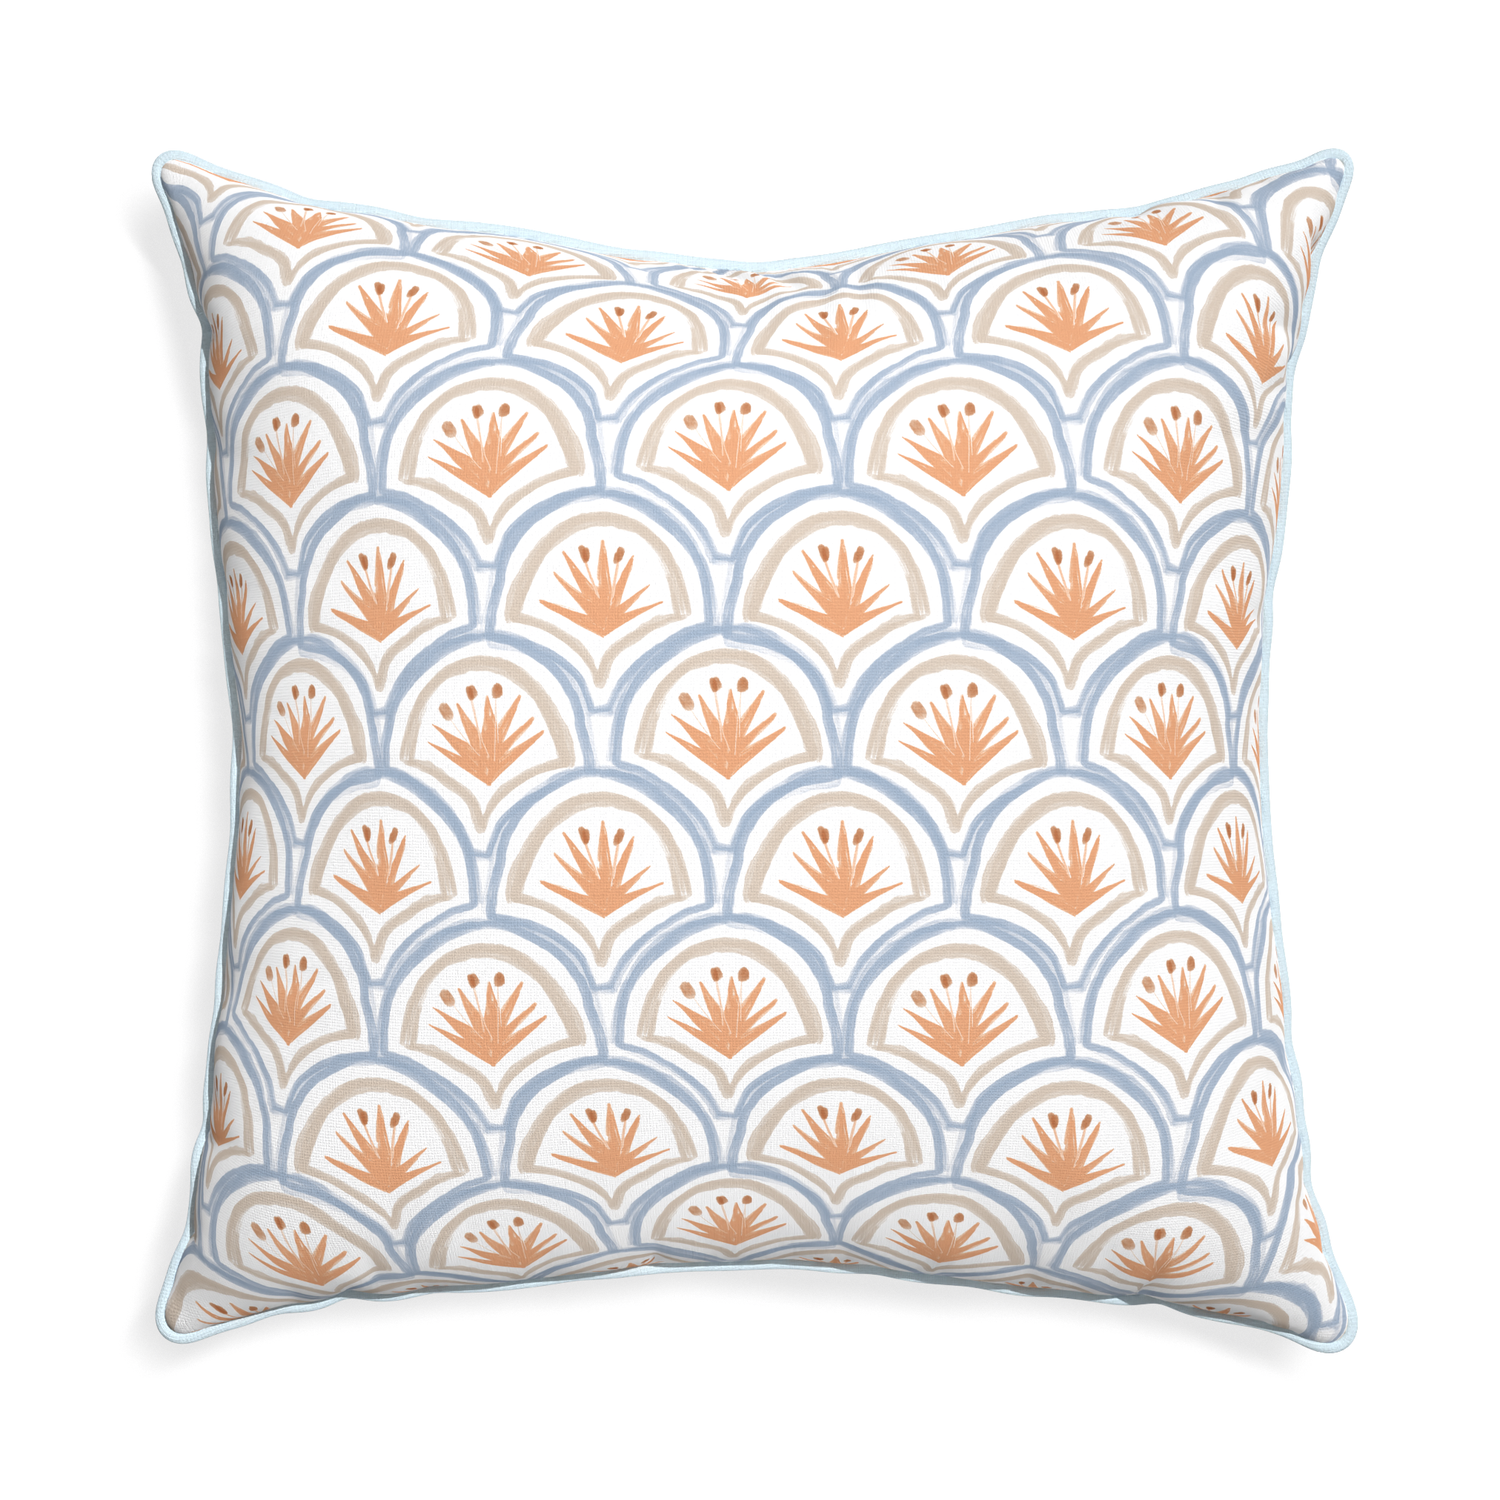 Euro-sham thatcher apricot custom pillow with powder piping on white background